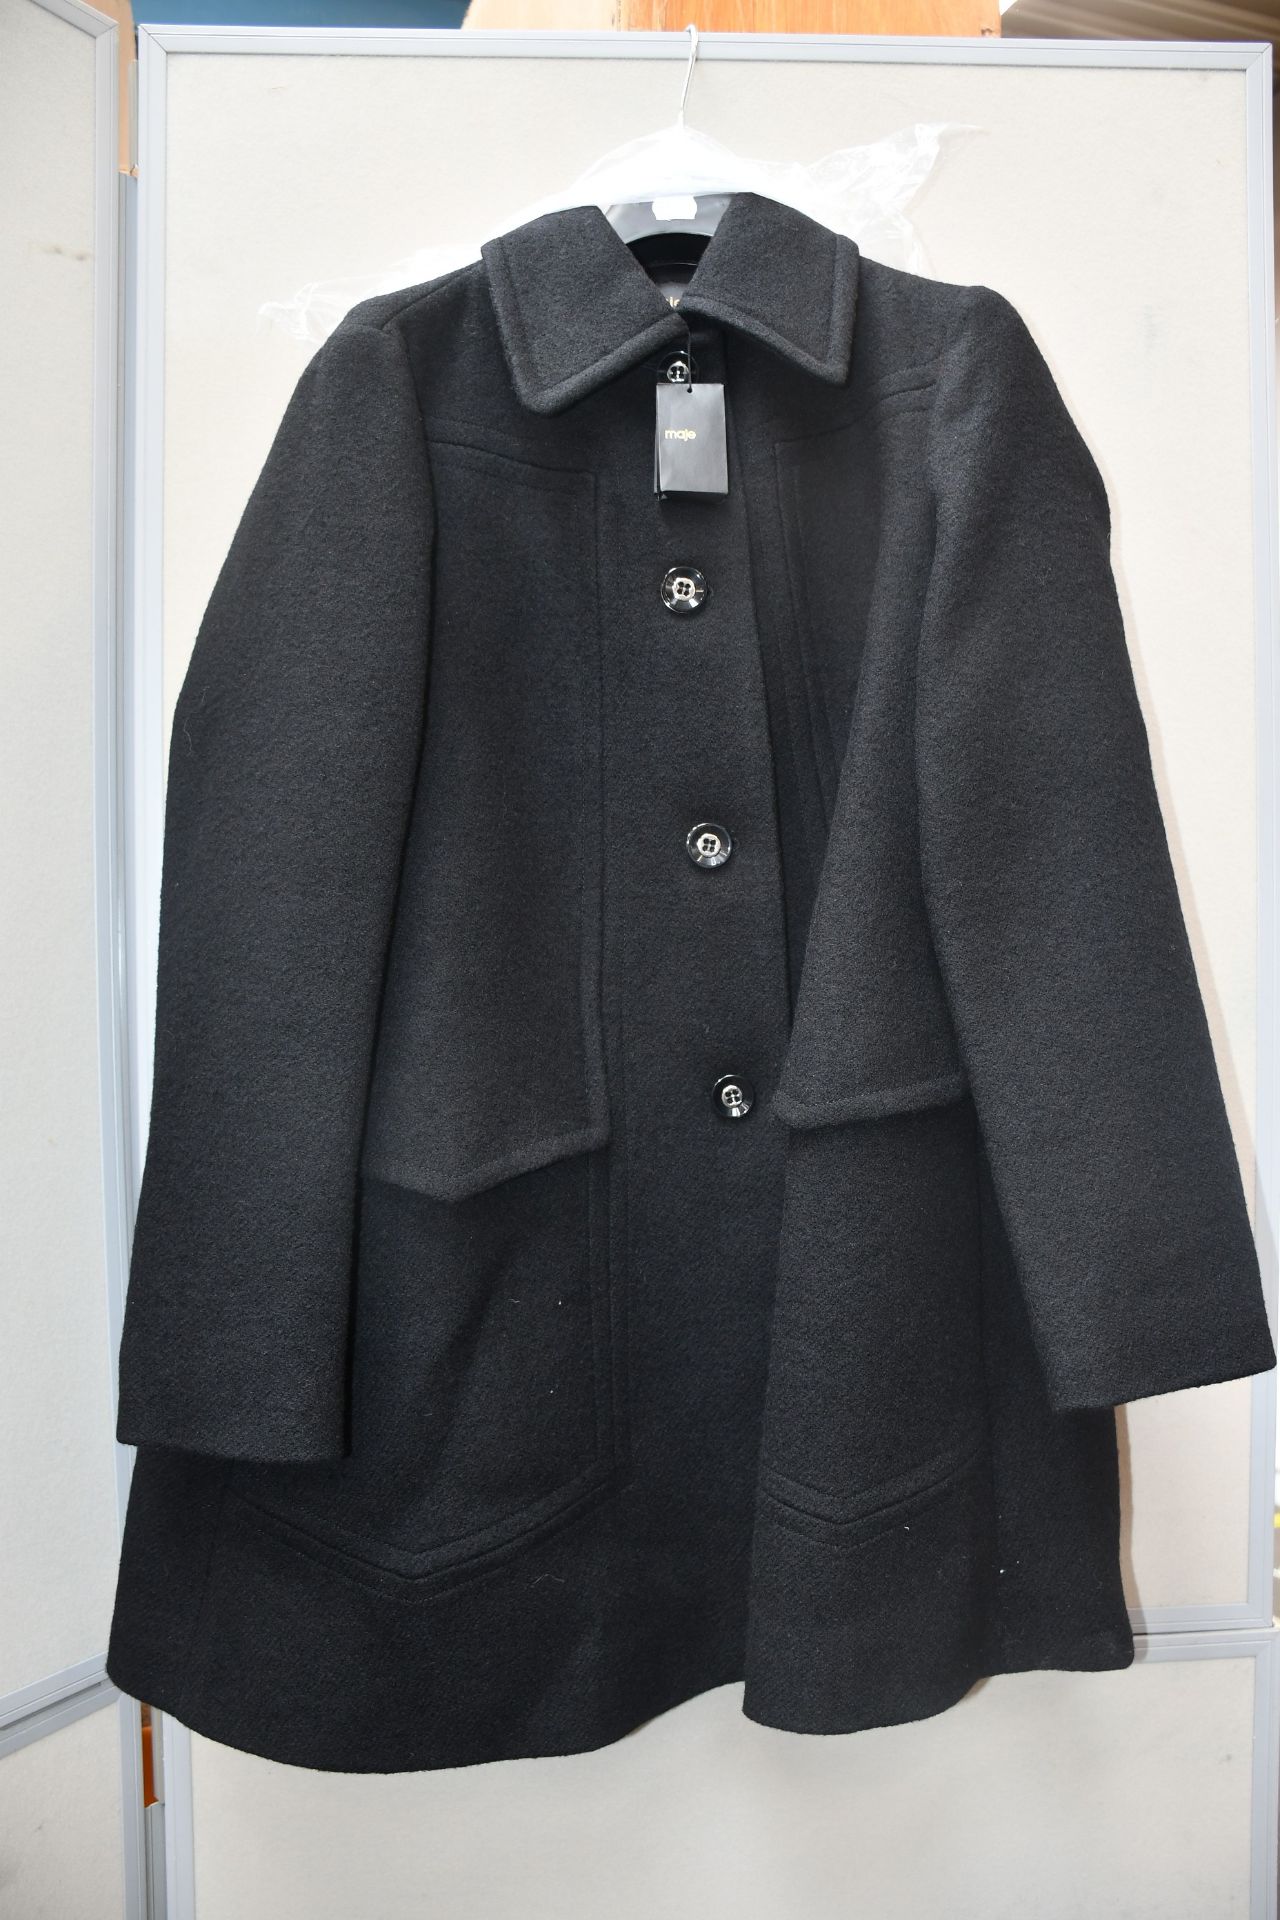 An as new Maje coat in black (T38 - RRP £450).